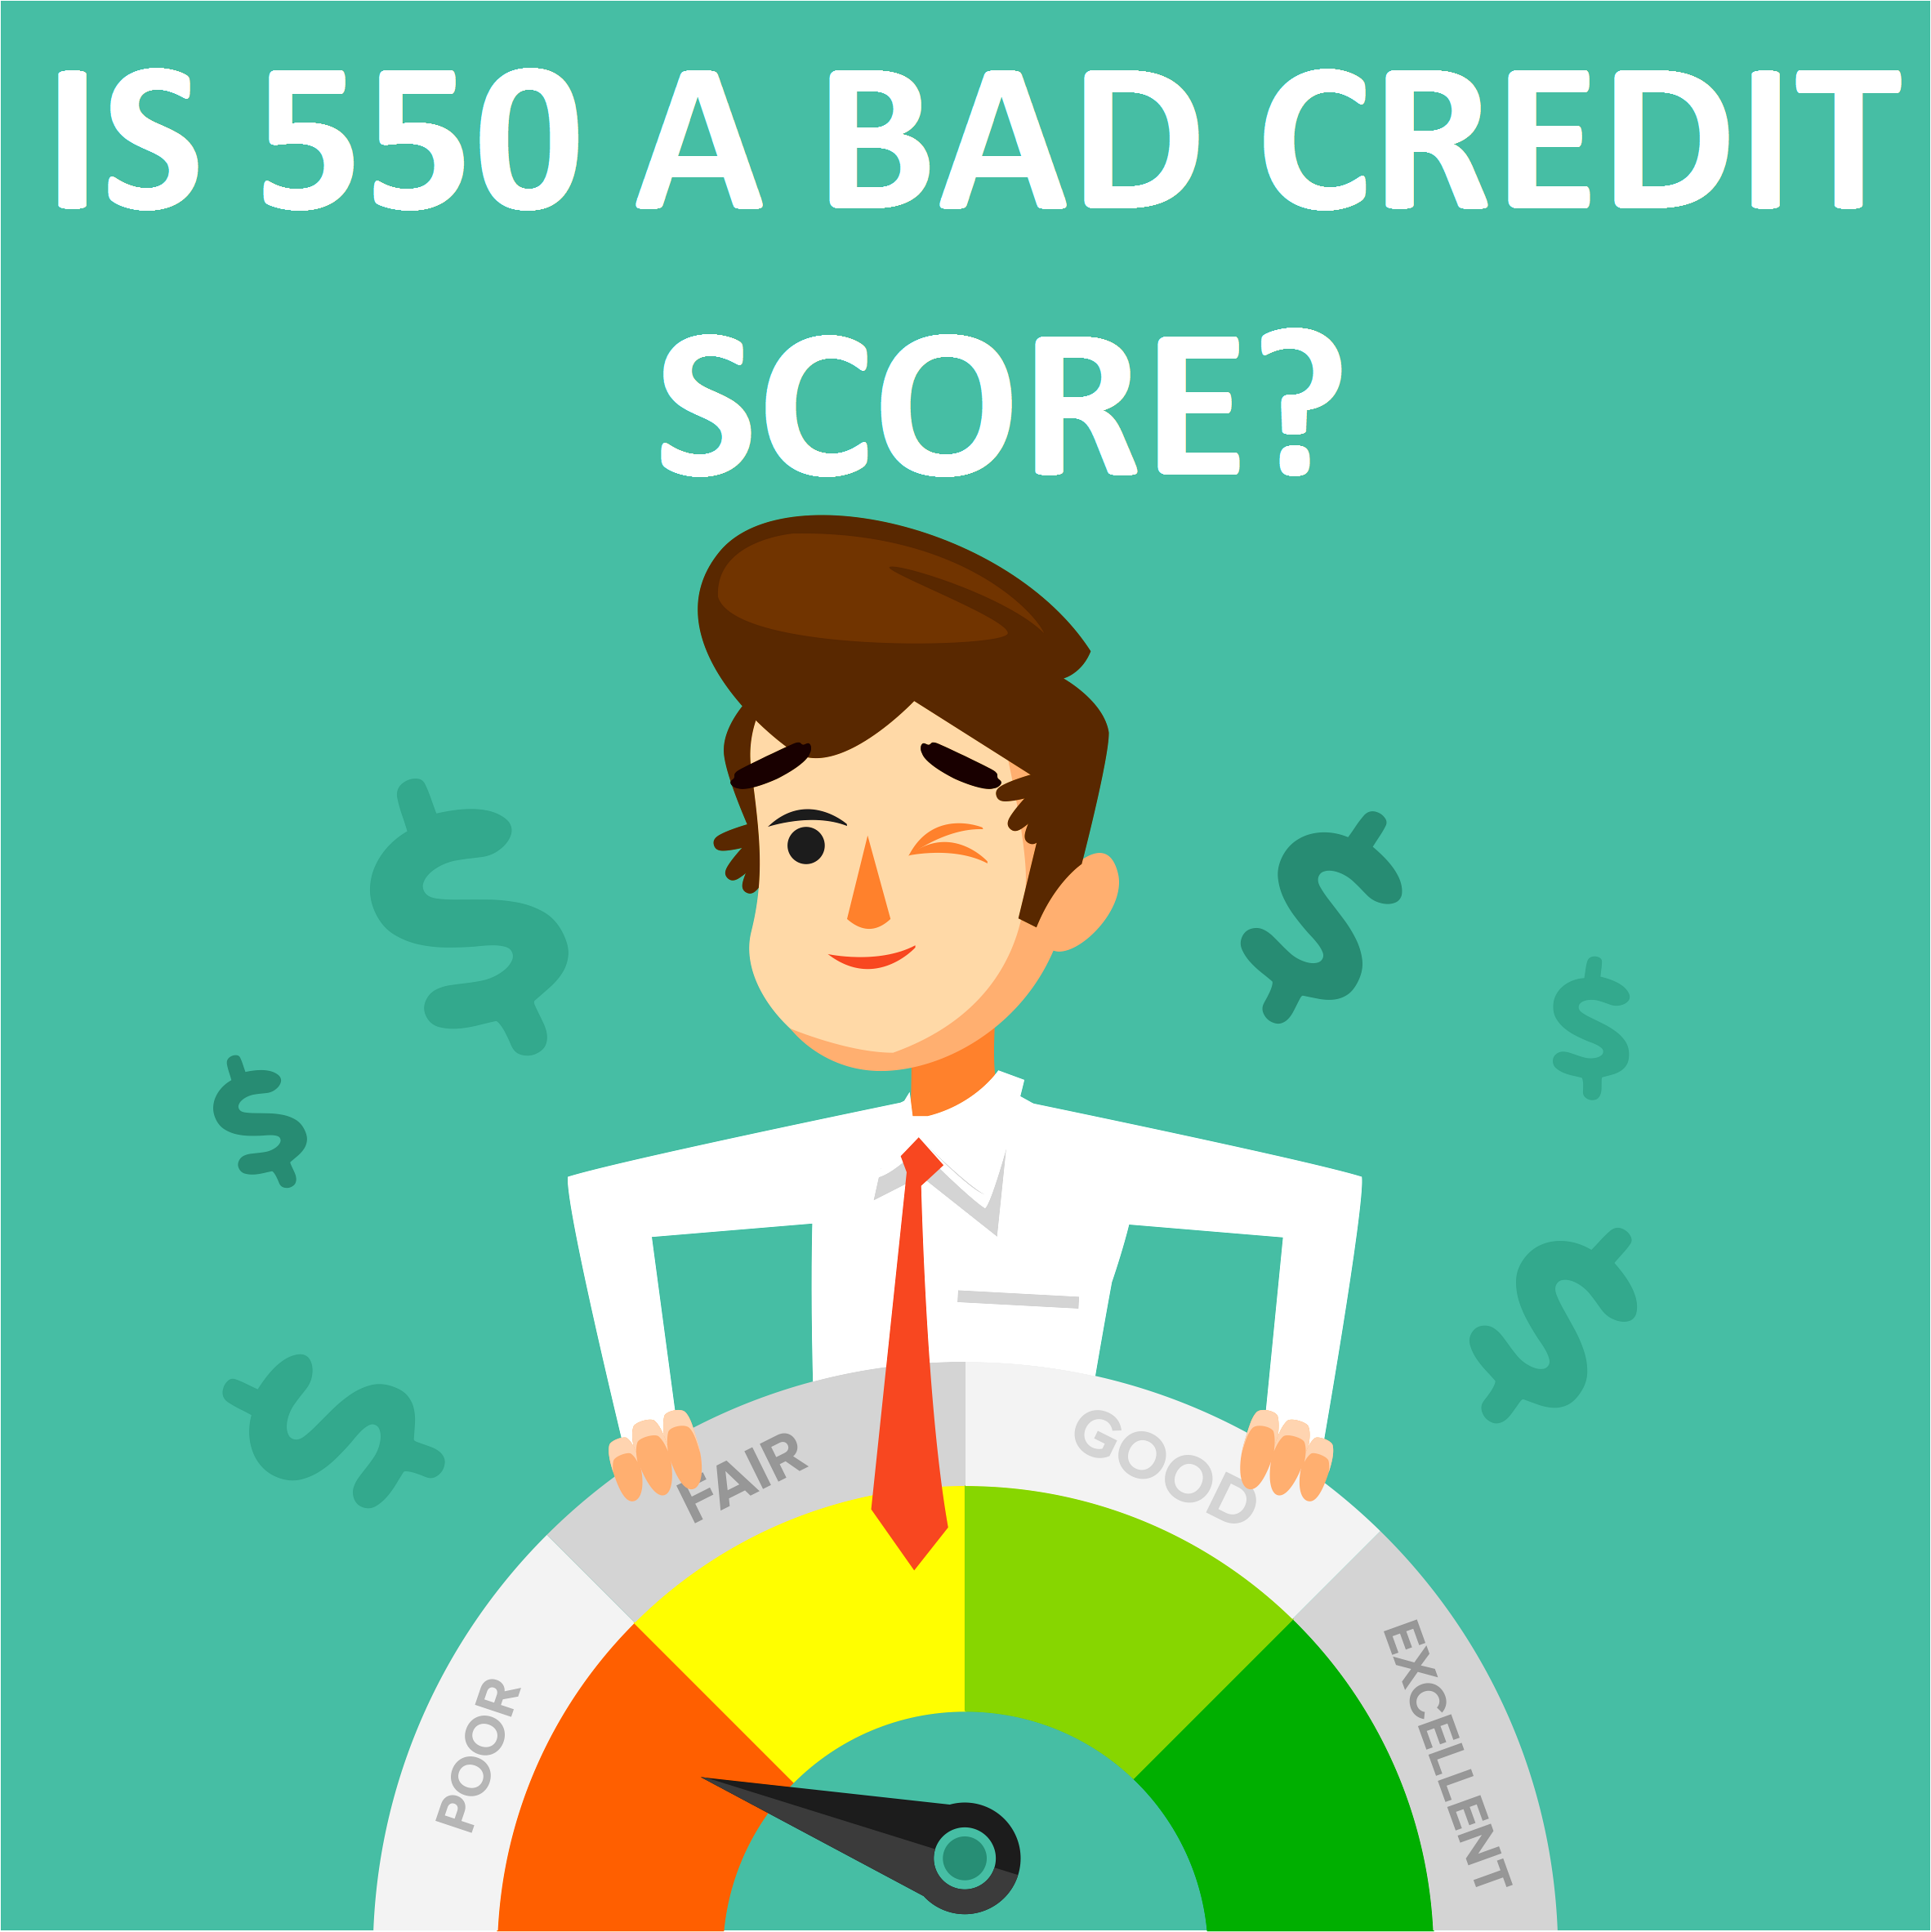 Is 550 a Bad Credit Score?